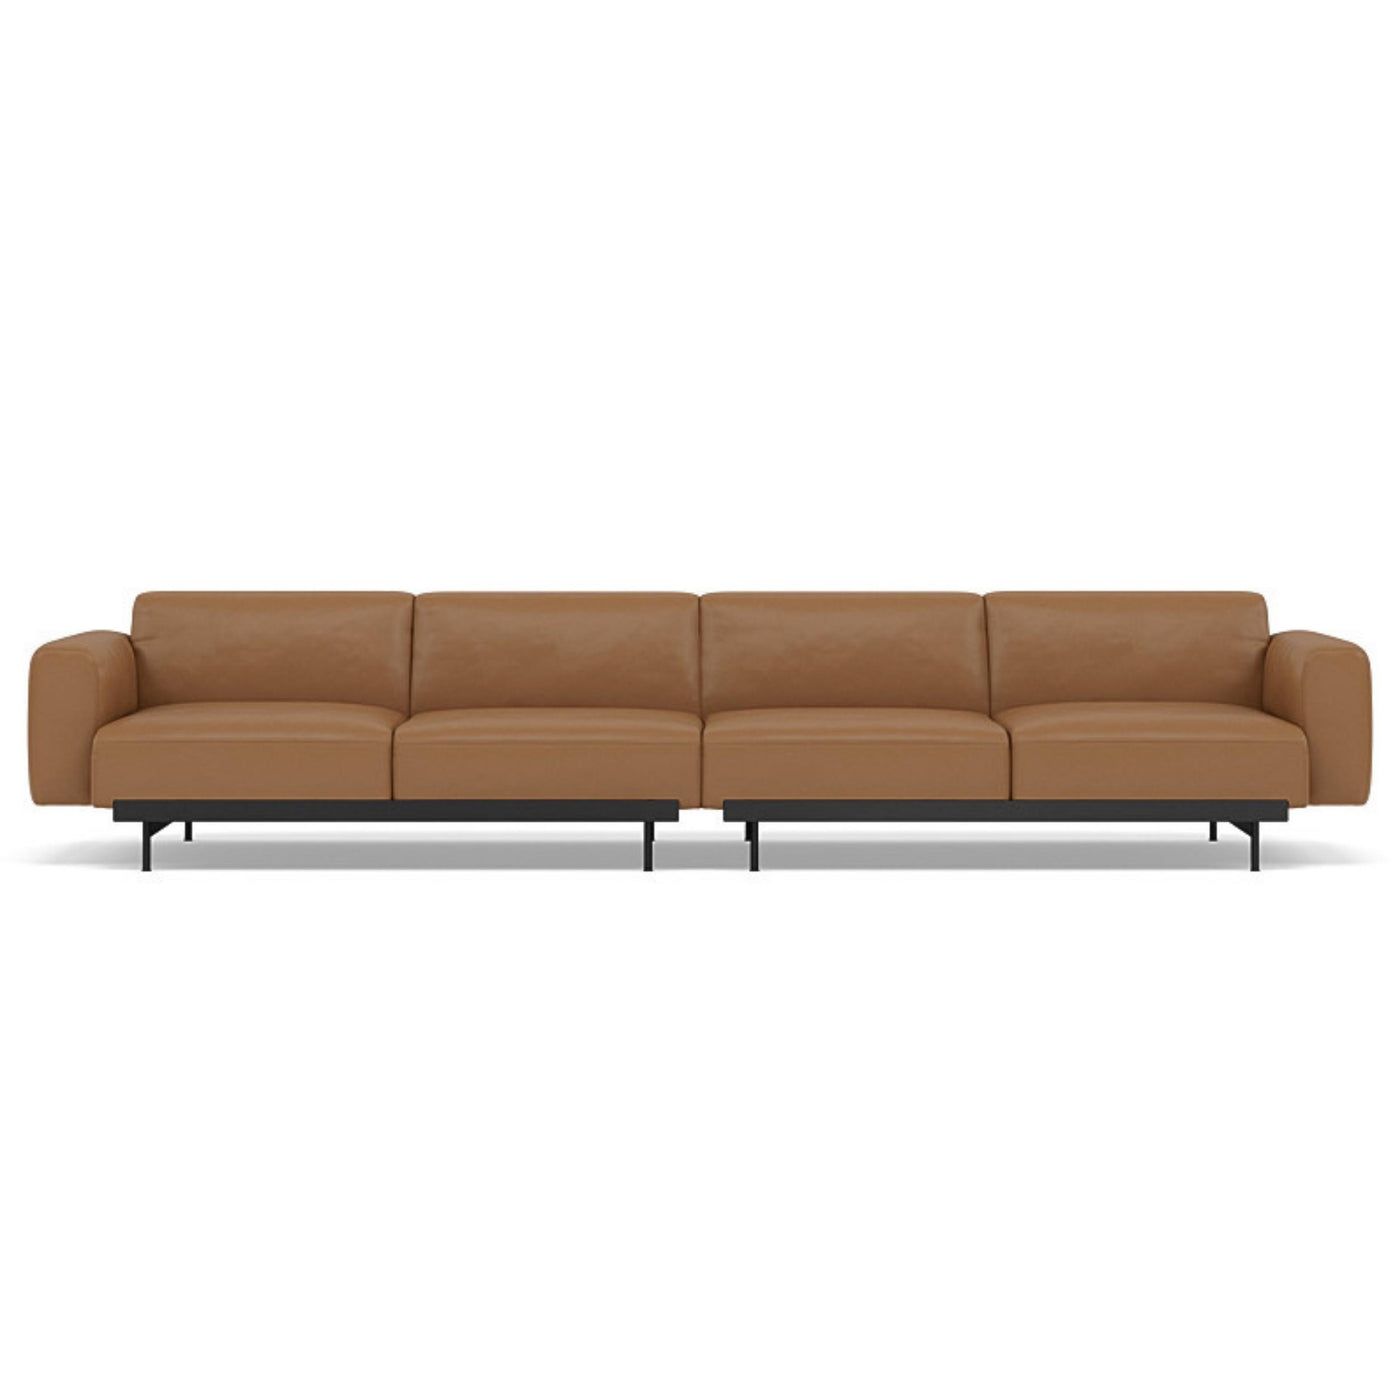 Muuto In Situ Modular 4 Seater Sofa configuration 1. Made to order from someday designs. #colour_cognac-refine-leather